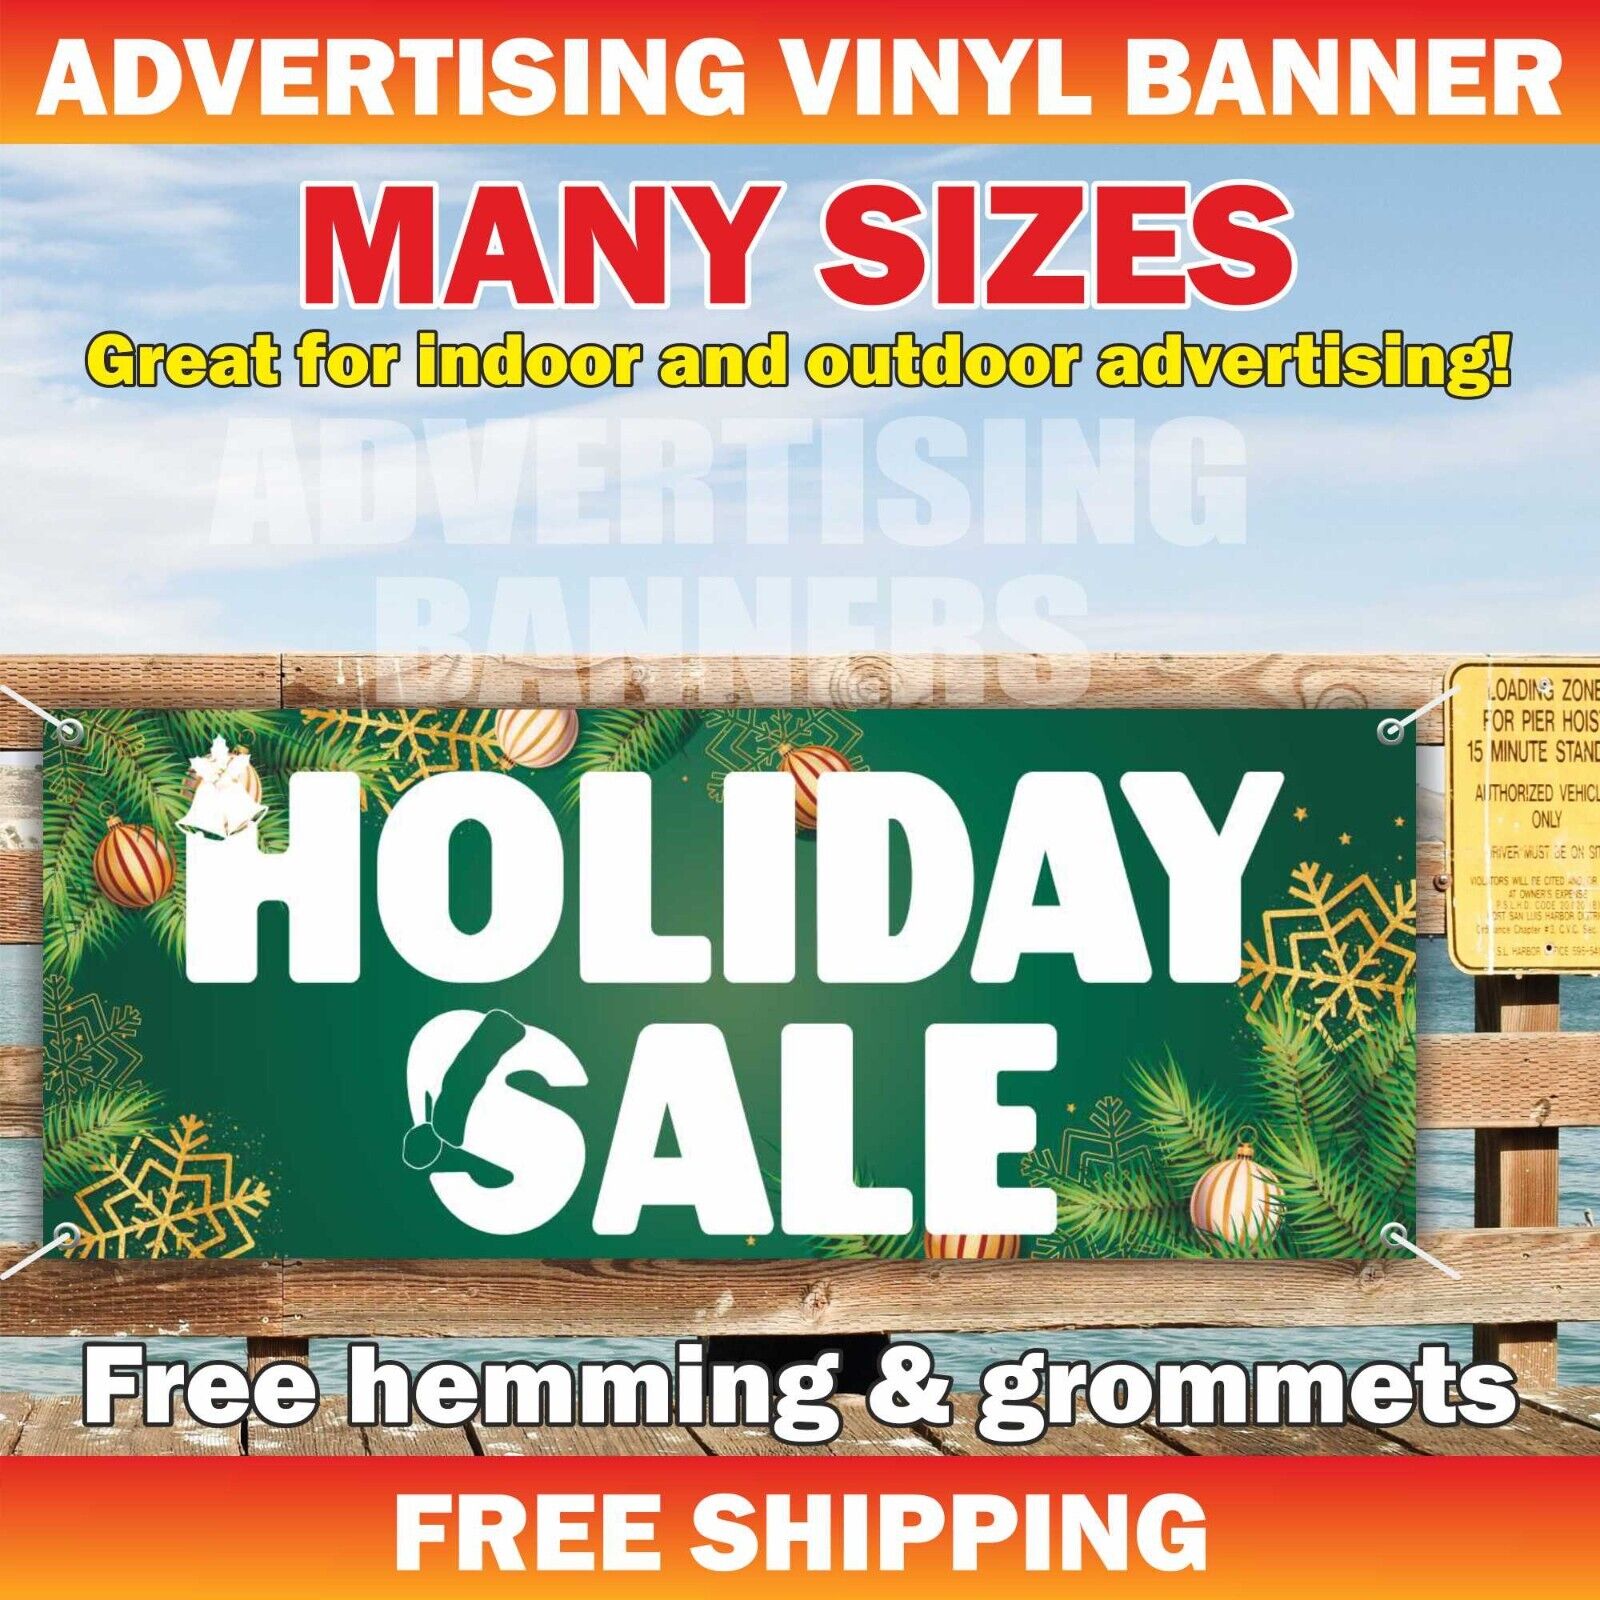 Holiday Sale Advertising Banner Vinyl Mesh Sign Merry Christmas Xmas New Year